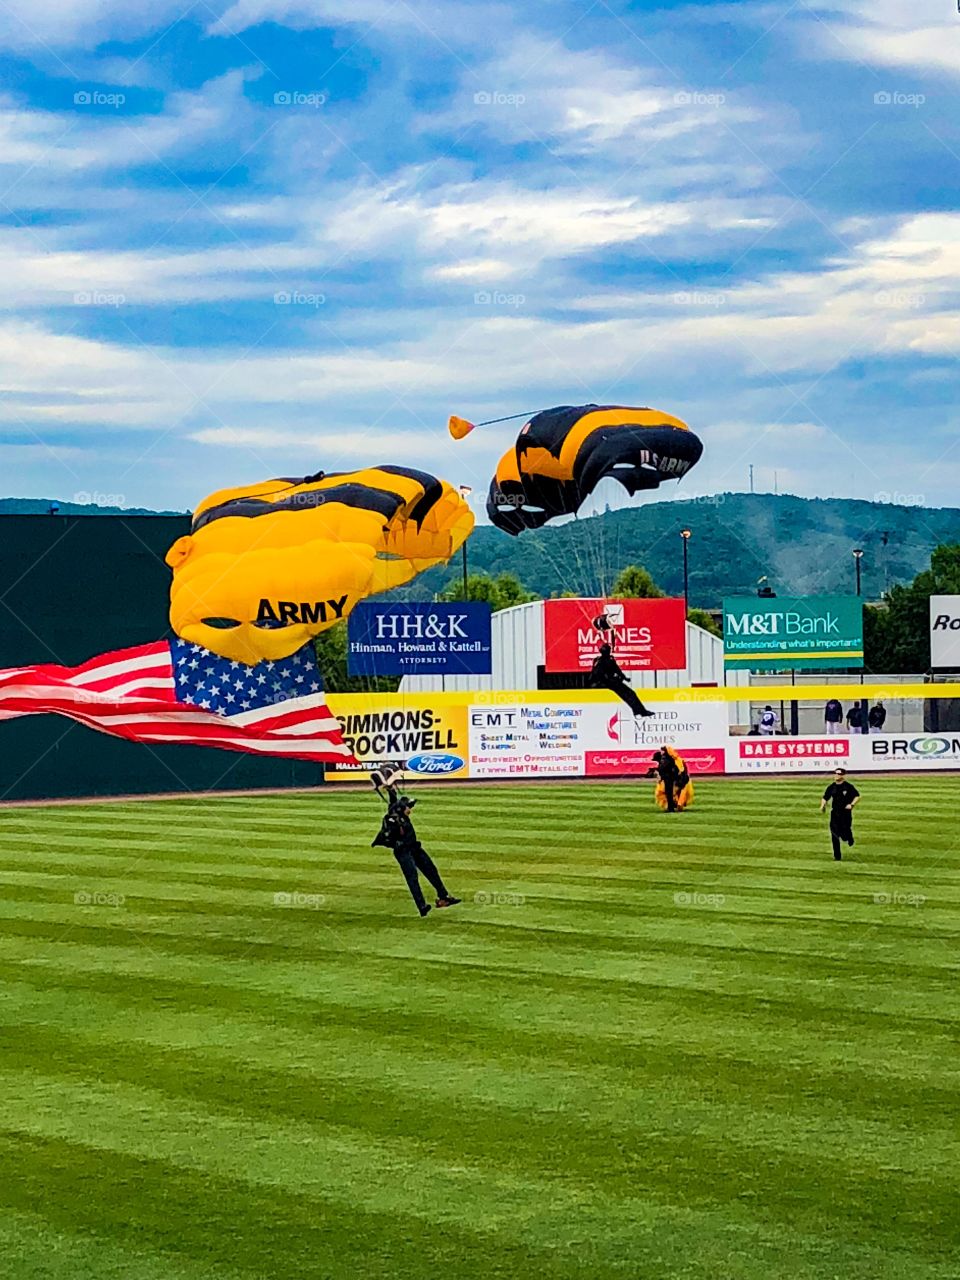 Army skydivers during national anthem at a baseball game 